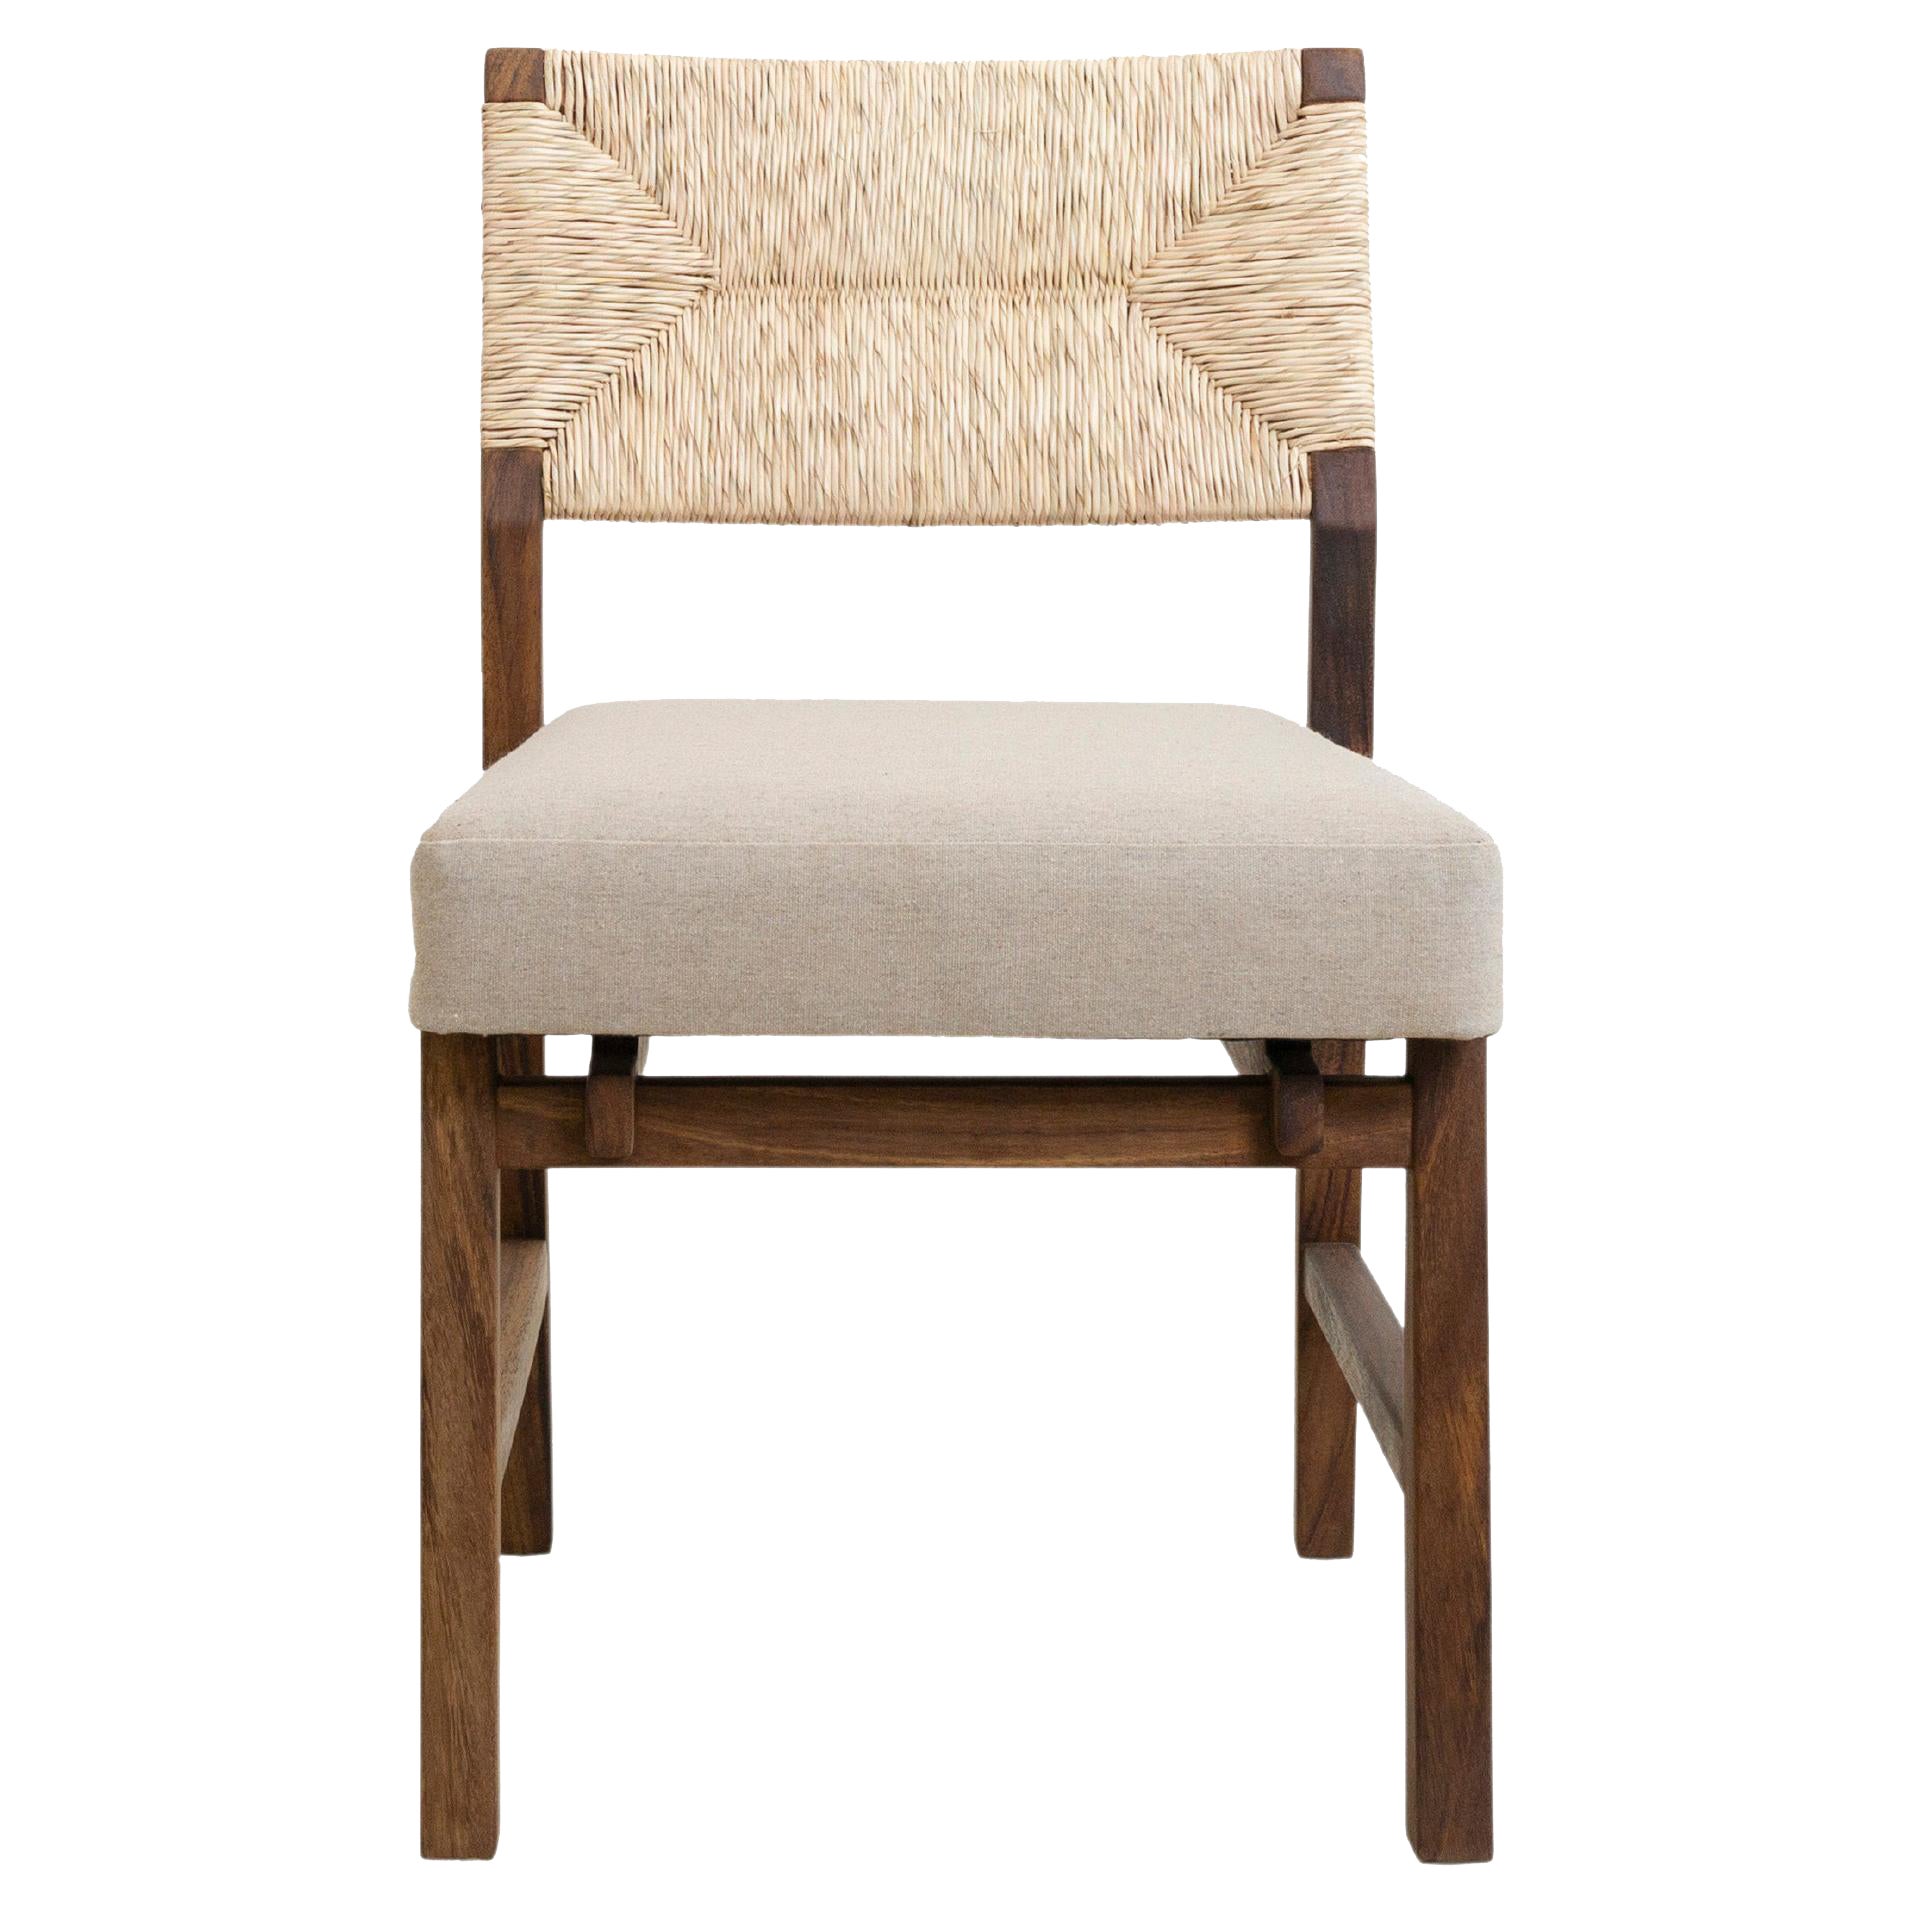 Lago Dining Chair COM with Natural Palm Fiber Back, Contemporary Mexican Design